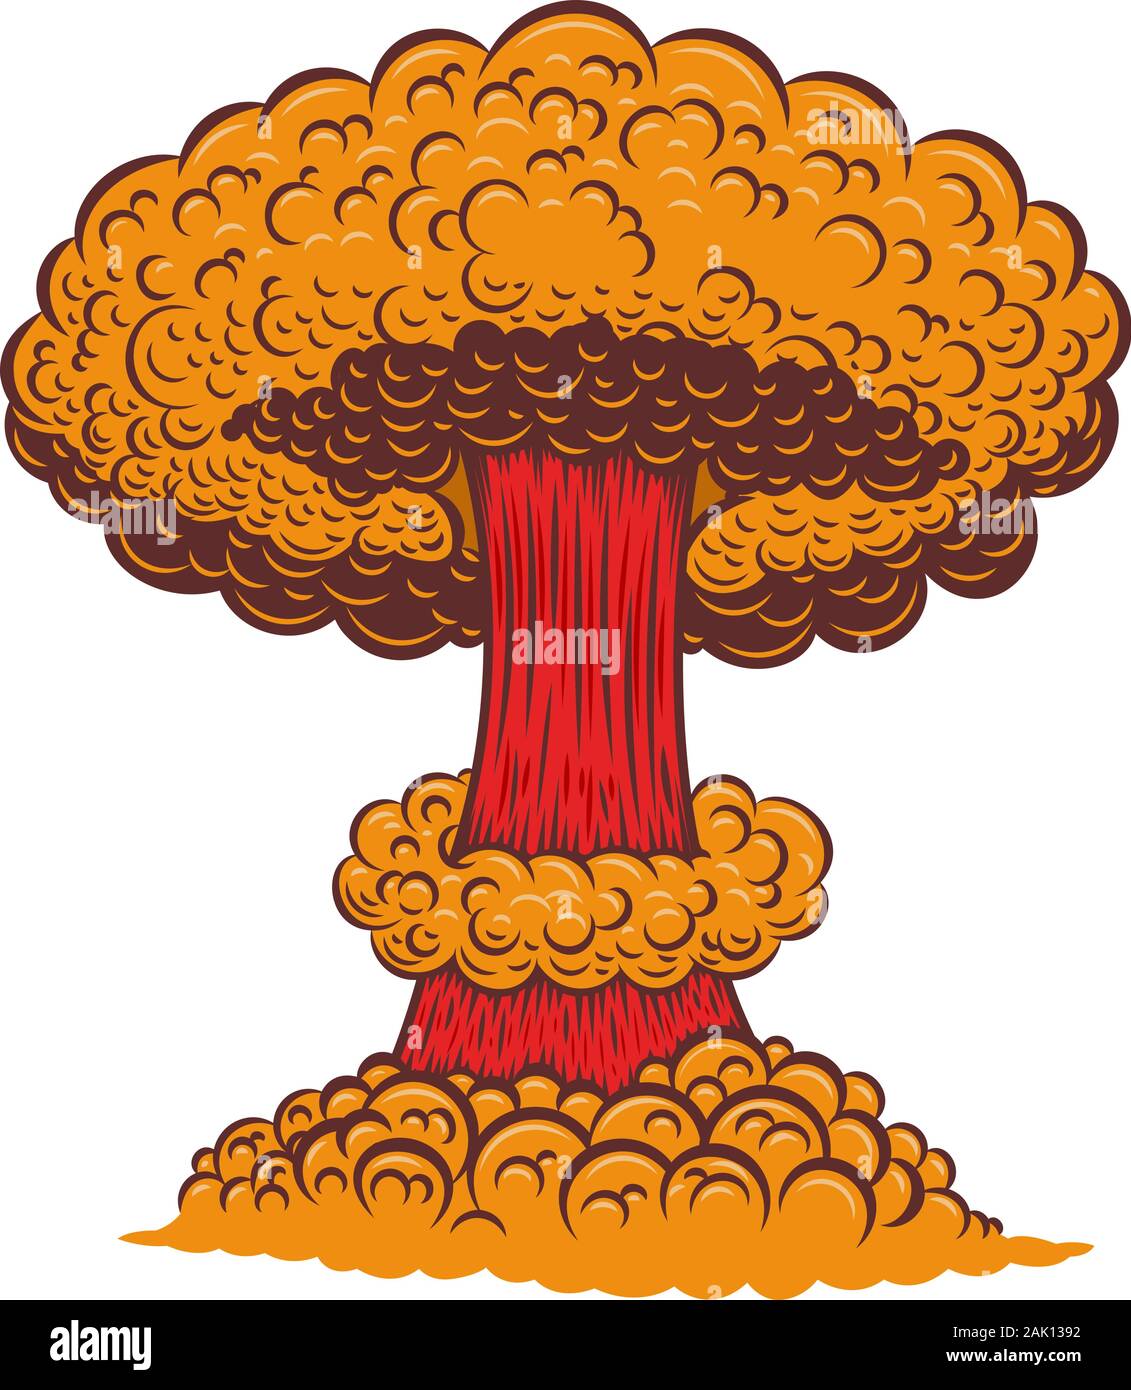 Illustration of atomic bomb explosion in comic style. Design element for poster, card, banner, sign, flyer.Vector illustration Stock Vector